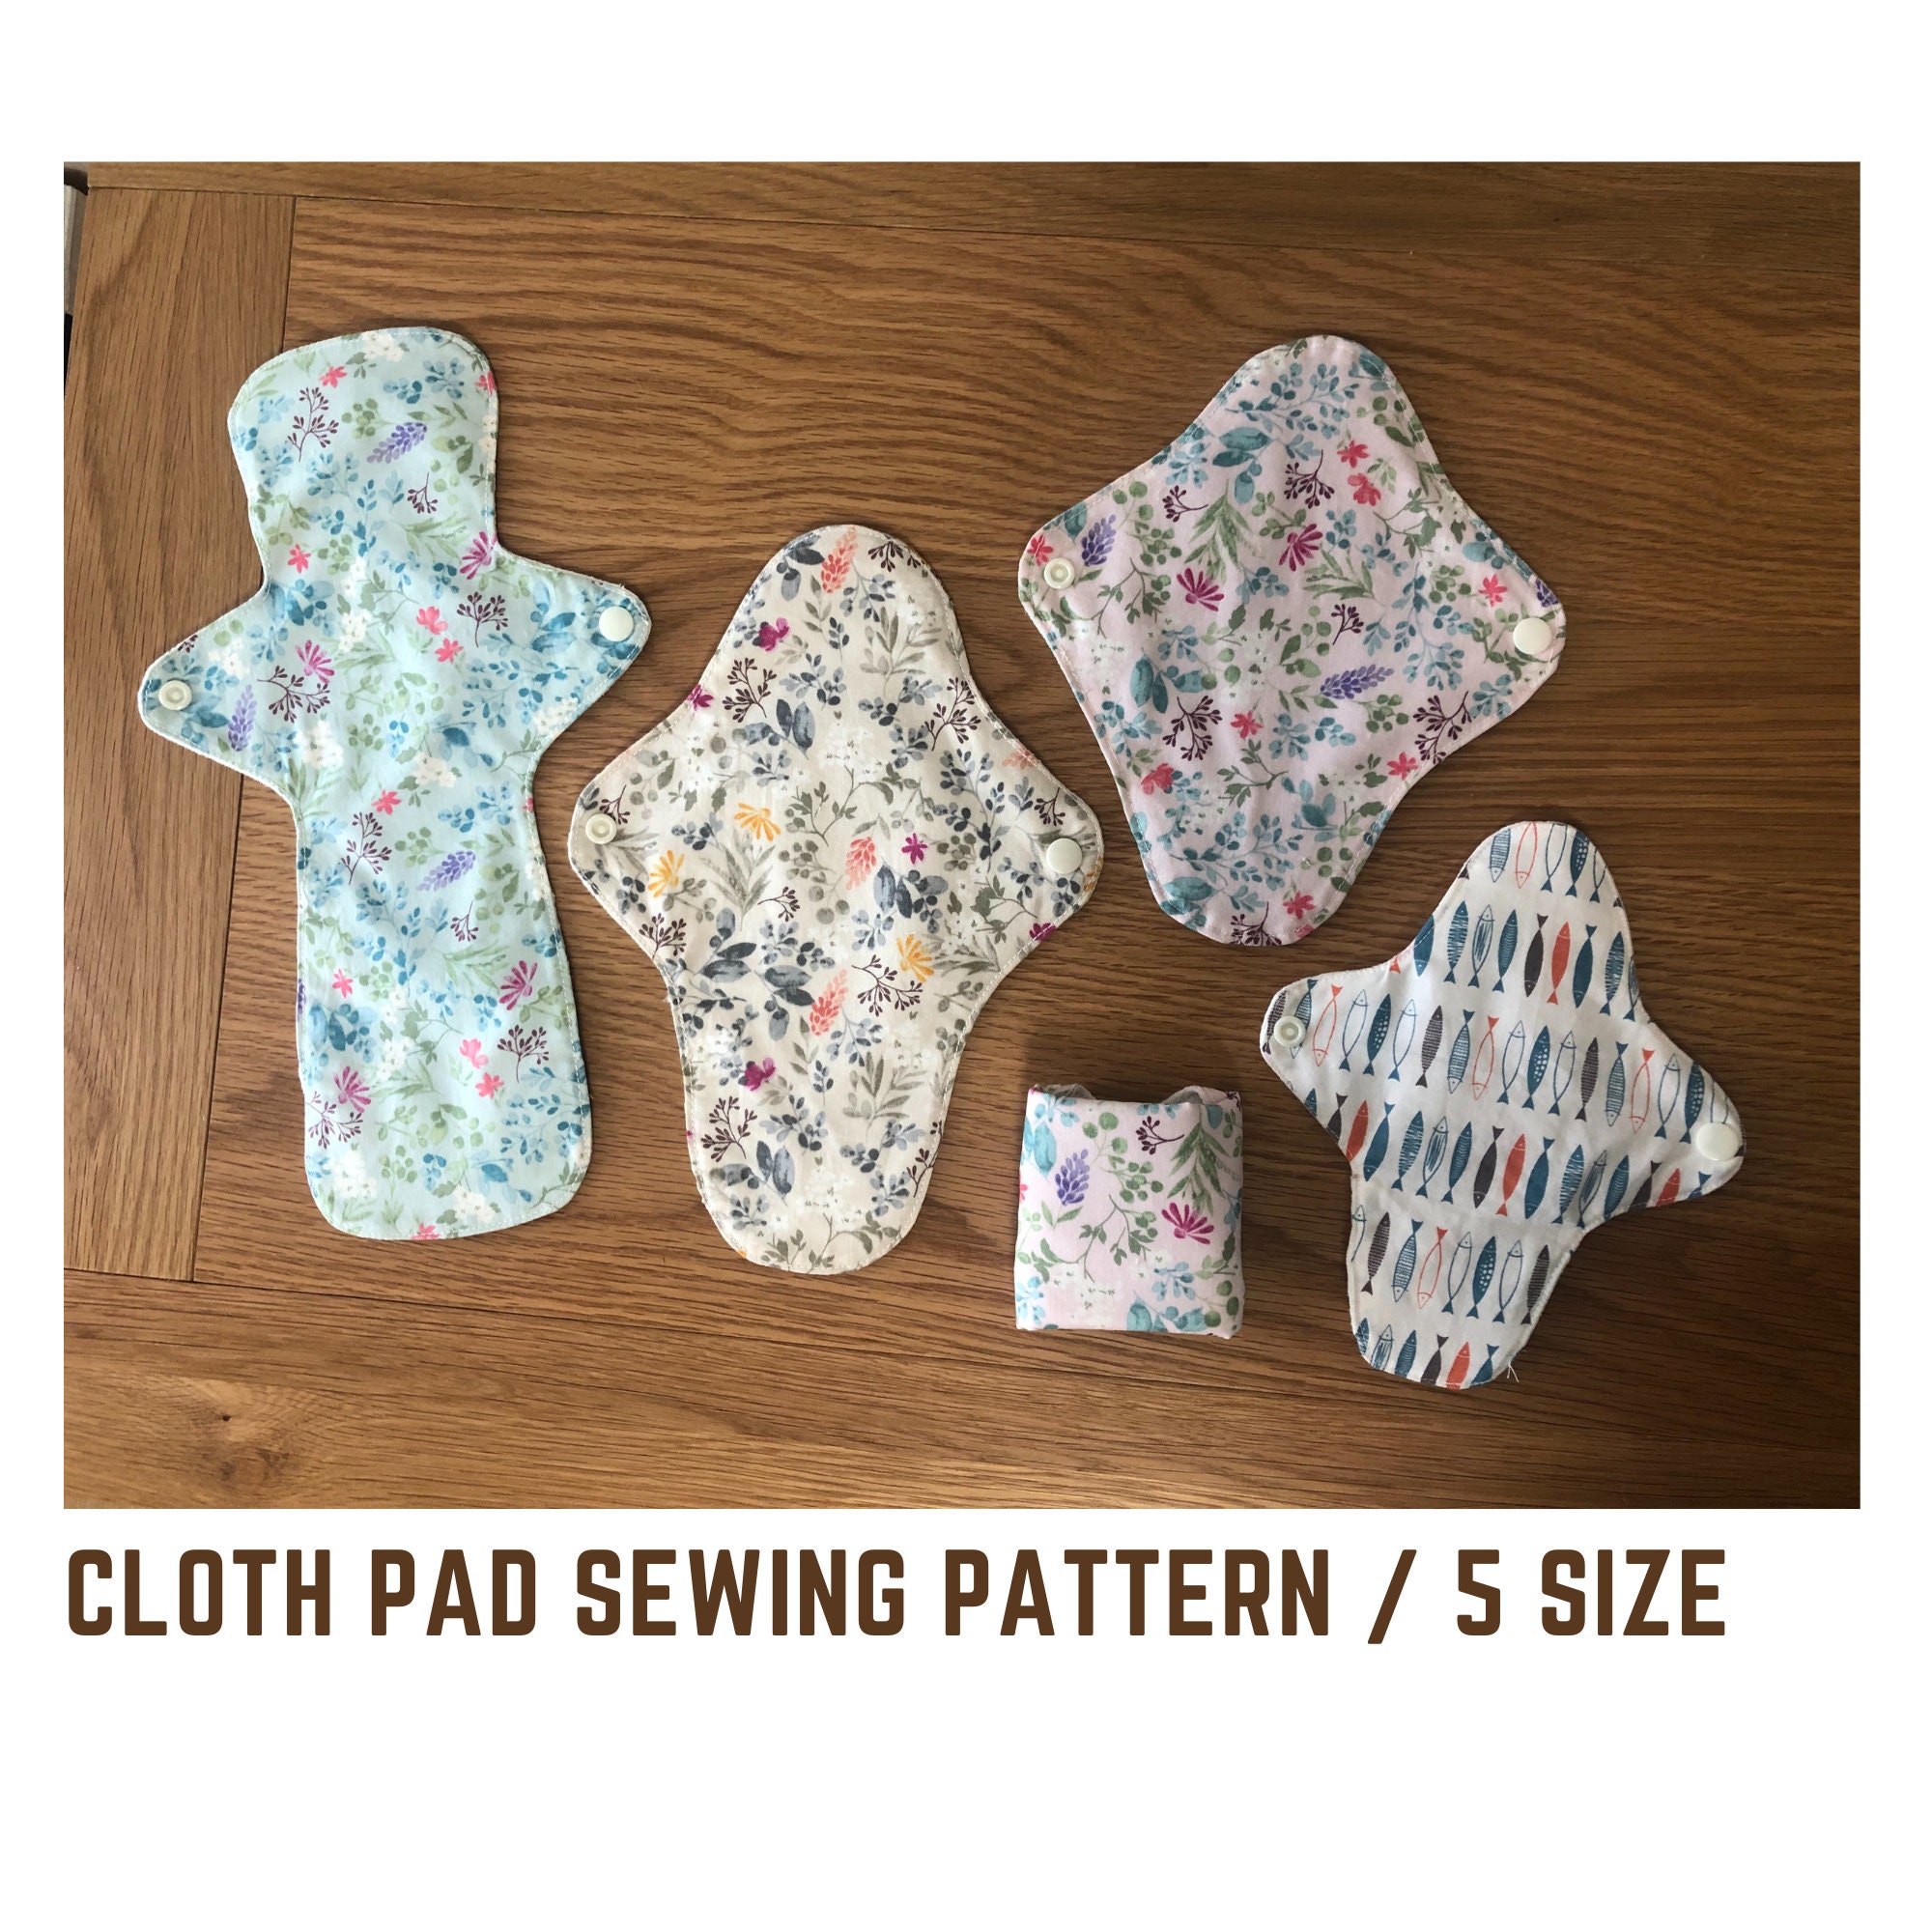 FABRICS for Sewing Cloth Pads 